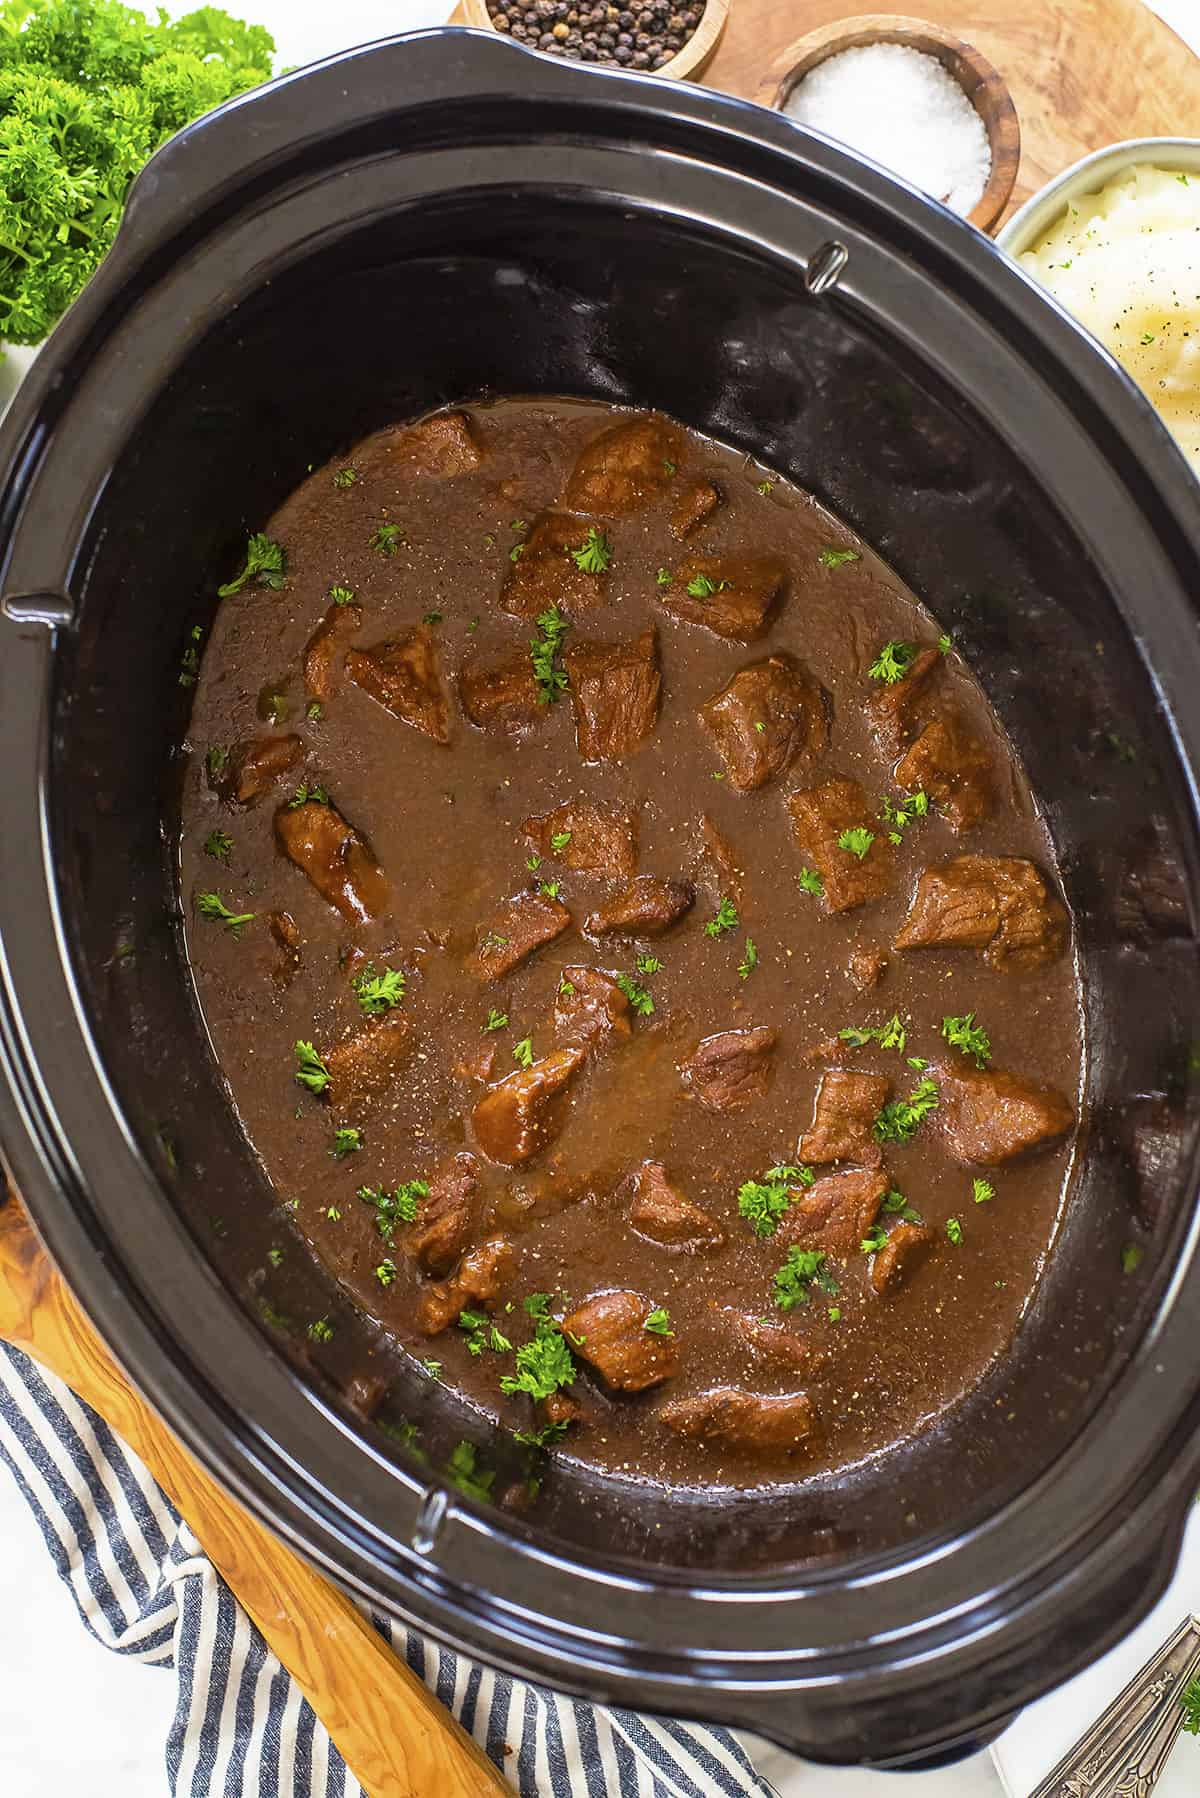 Beef tips and gravy in crockpot.